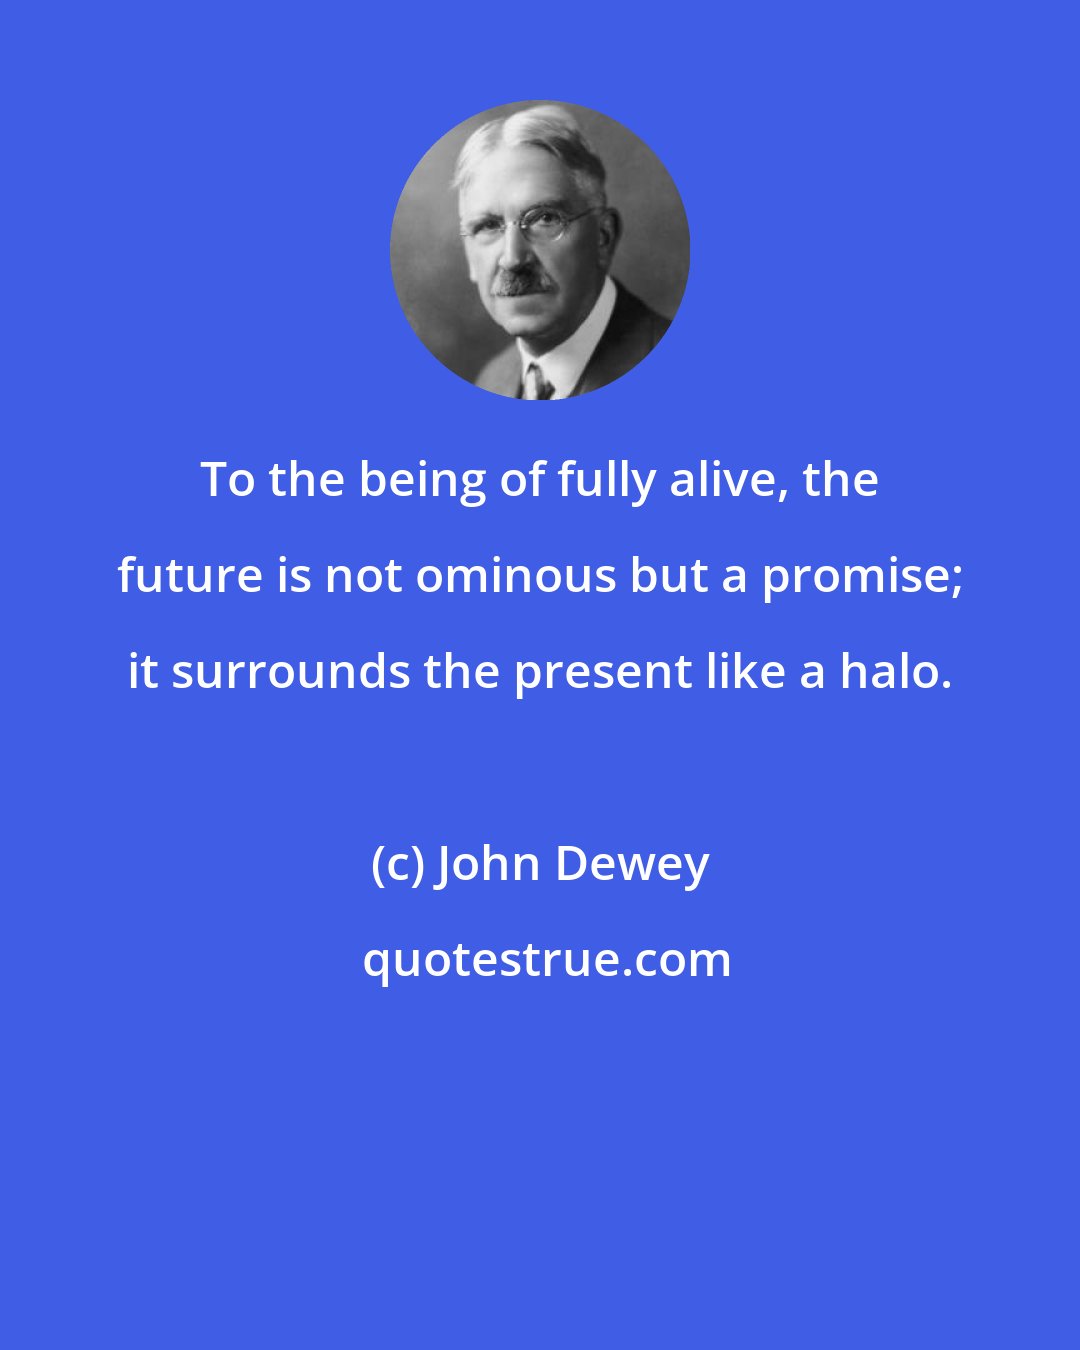 John Dewey: To the being of fully alive, the future is not ominous but a promise; it surrounds the present like a halo.